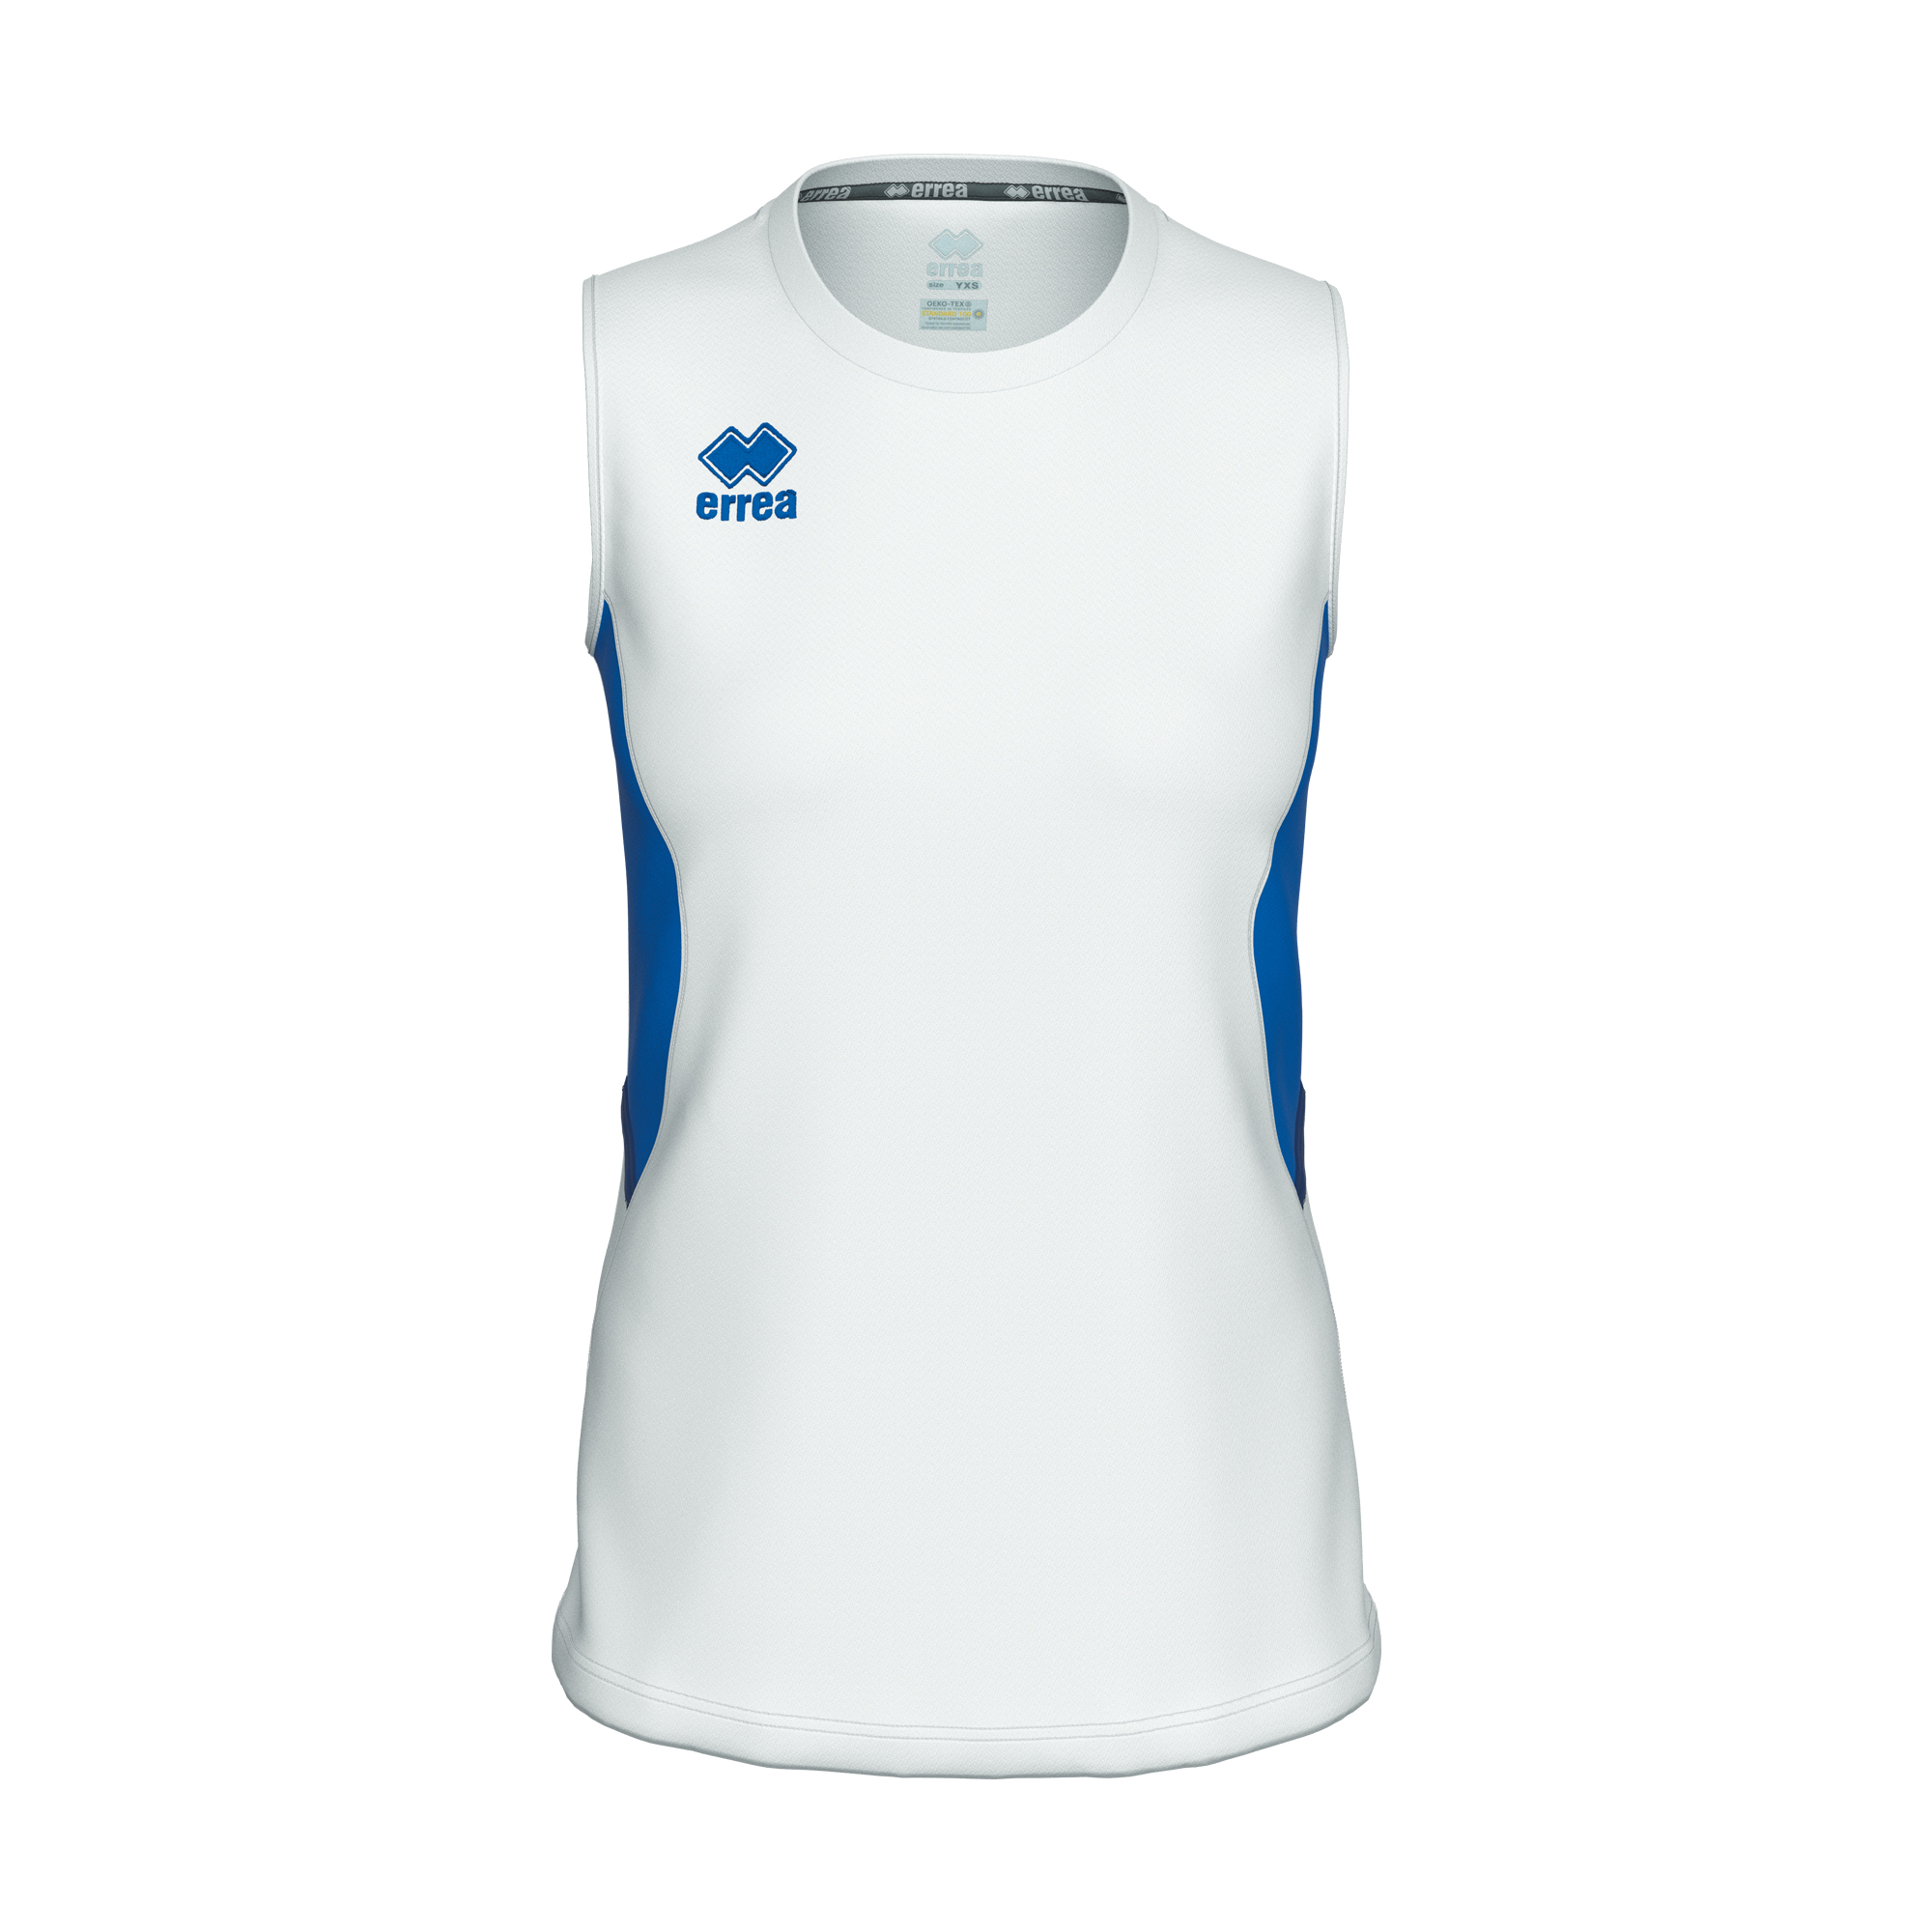 Errea Carry Volleyball Shirt White Blue Navy